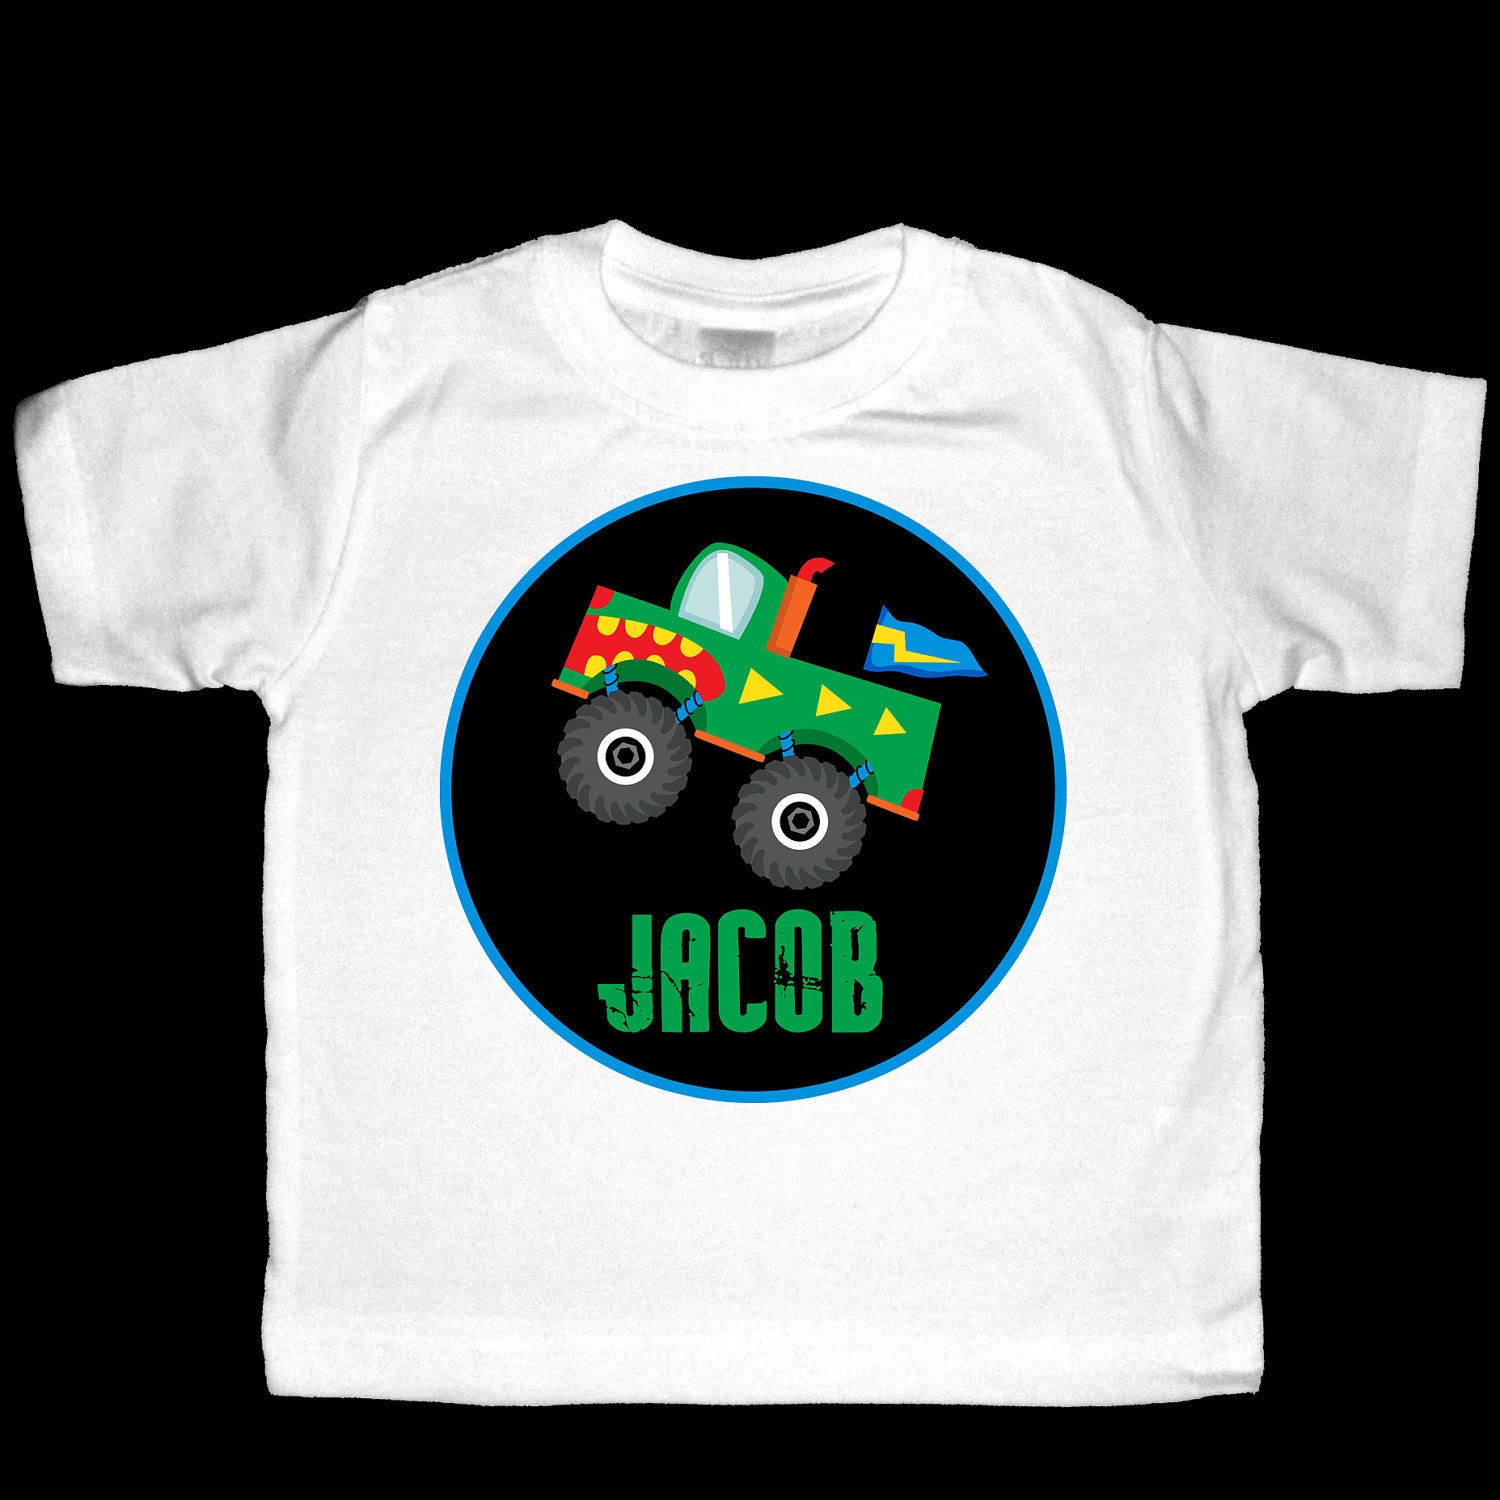 Cool Personalized Monster Truck Shirt or Bodysuit perfect